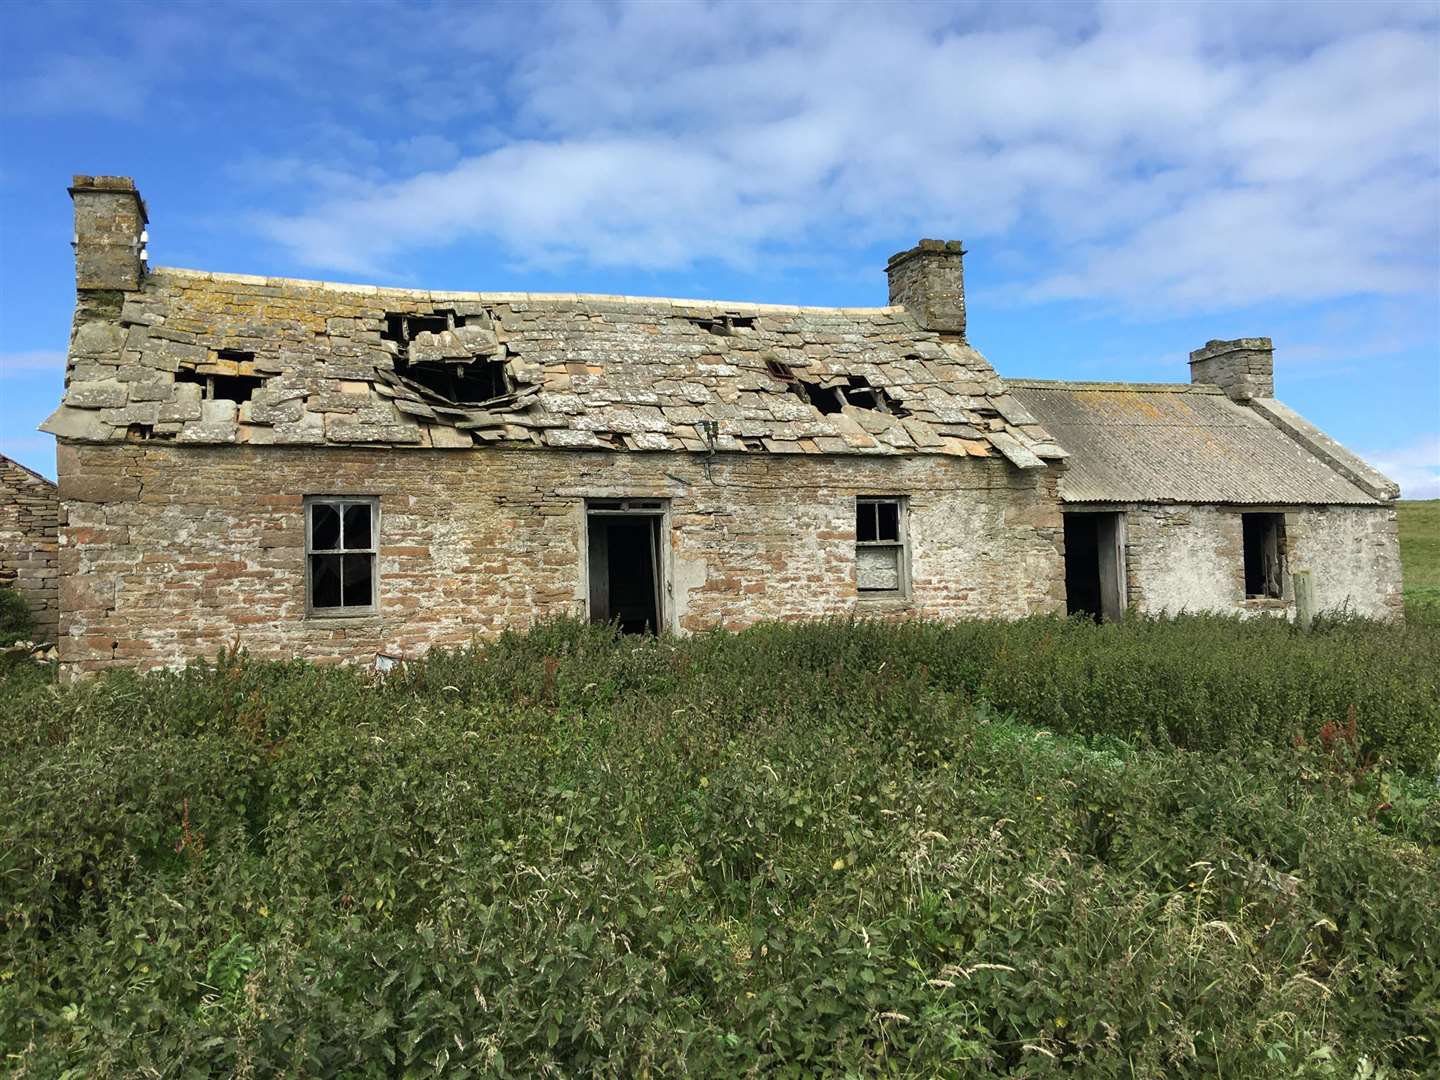 Many of the buildings are long abandoned.